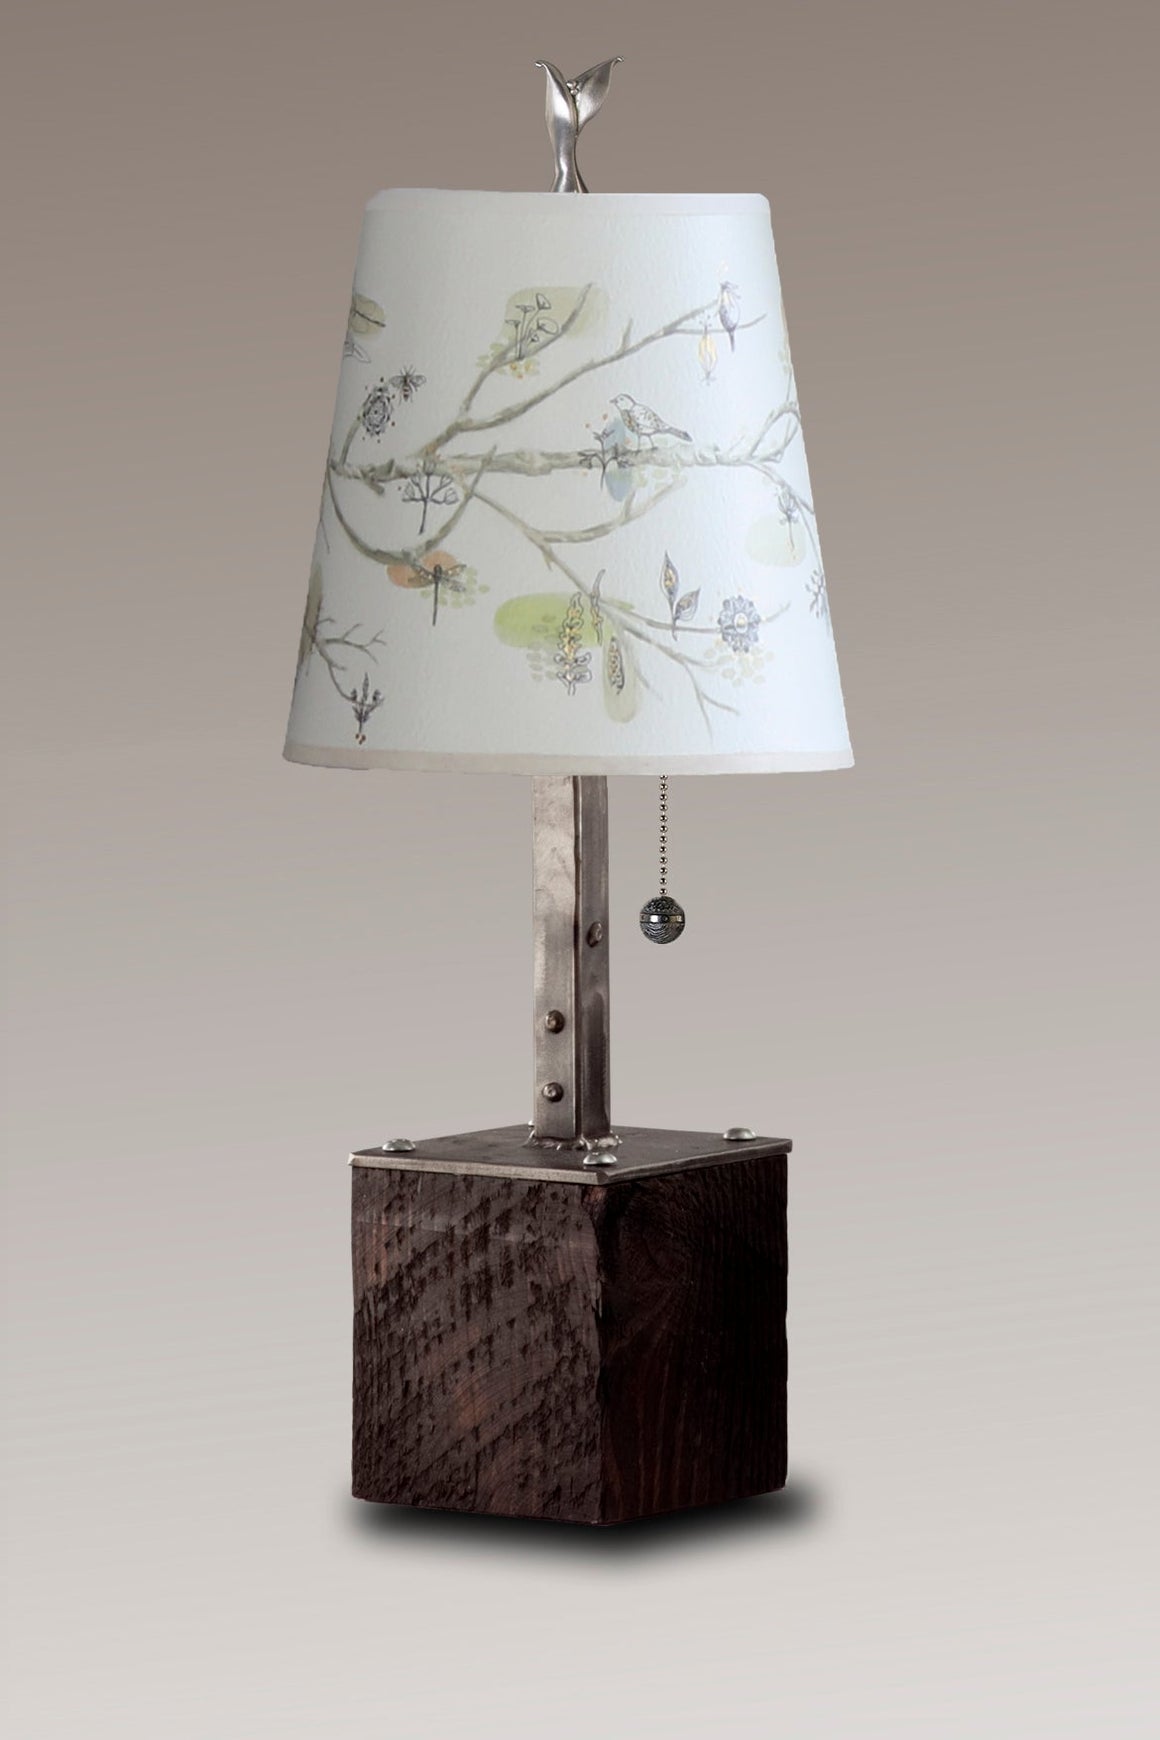 Steel Table Lamp on Reclaimed Wood with Small Drum Shade in Artful Branch